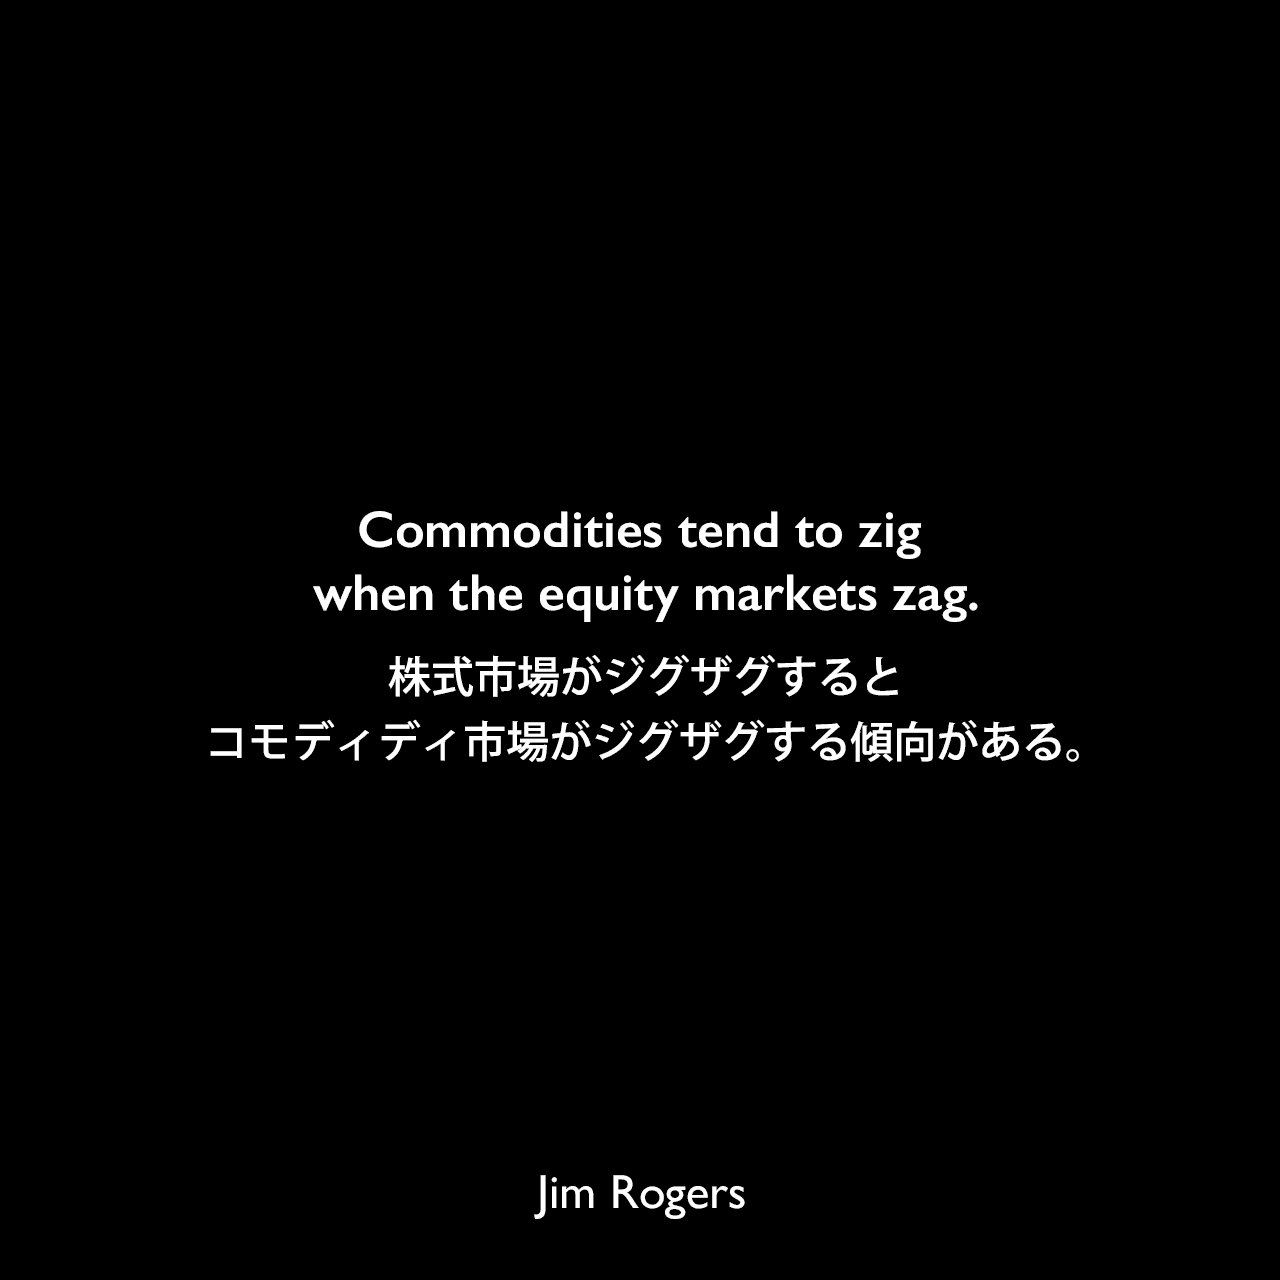 Commodities tend to zig when the equity markets zag.株式市場がジグザグすると、コモディディ市場がジグザグする傾向がある。Jim Rogers